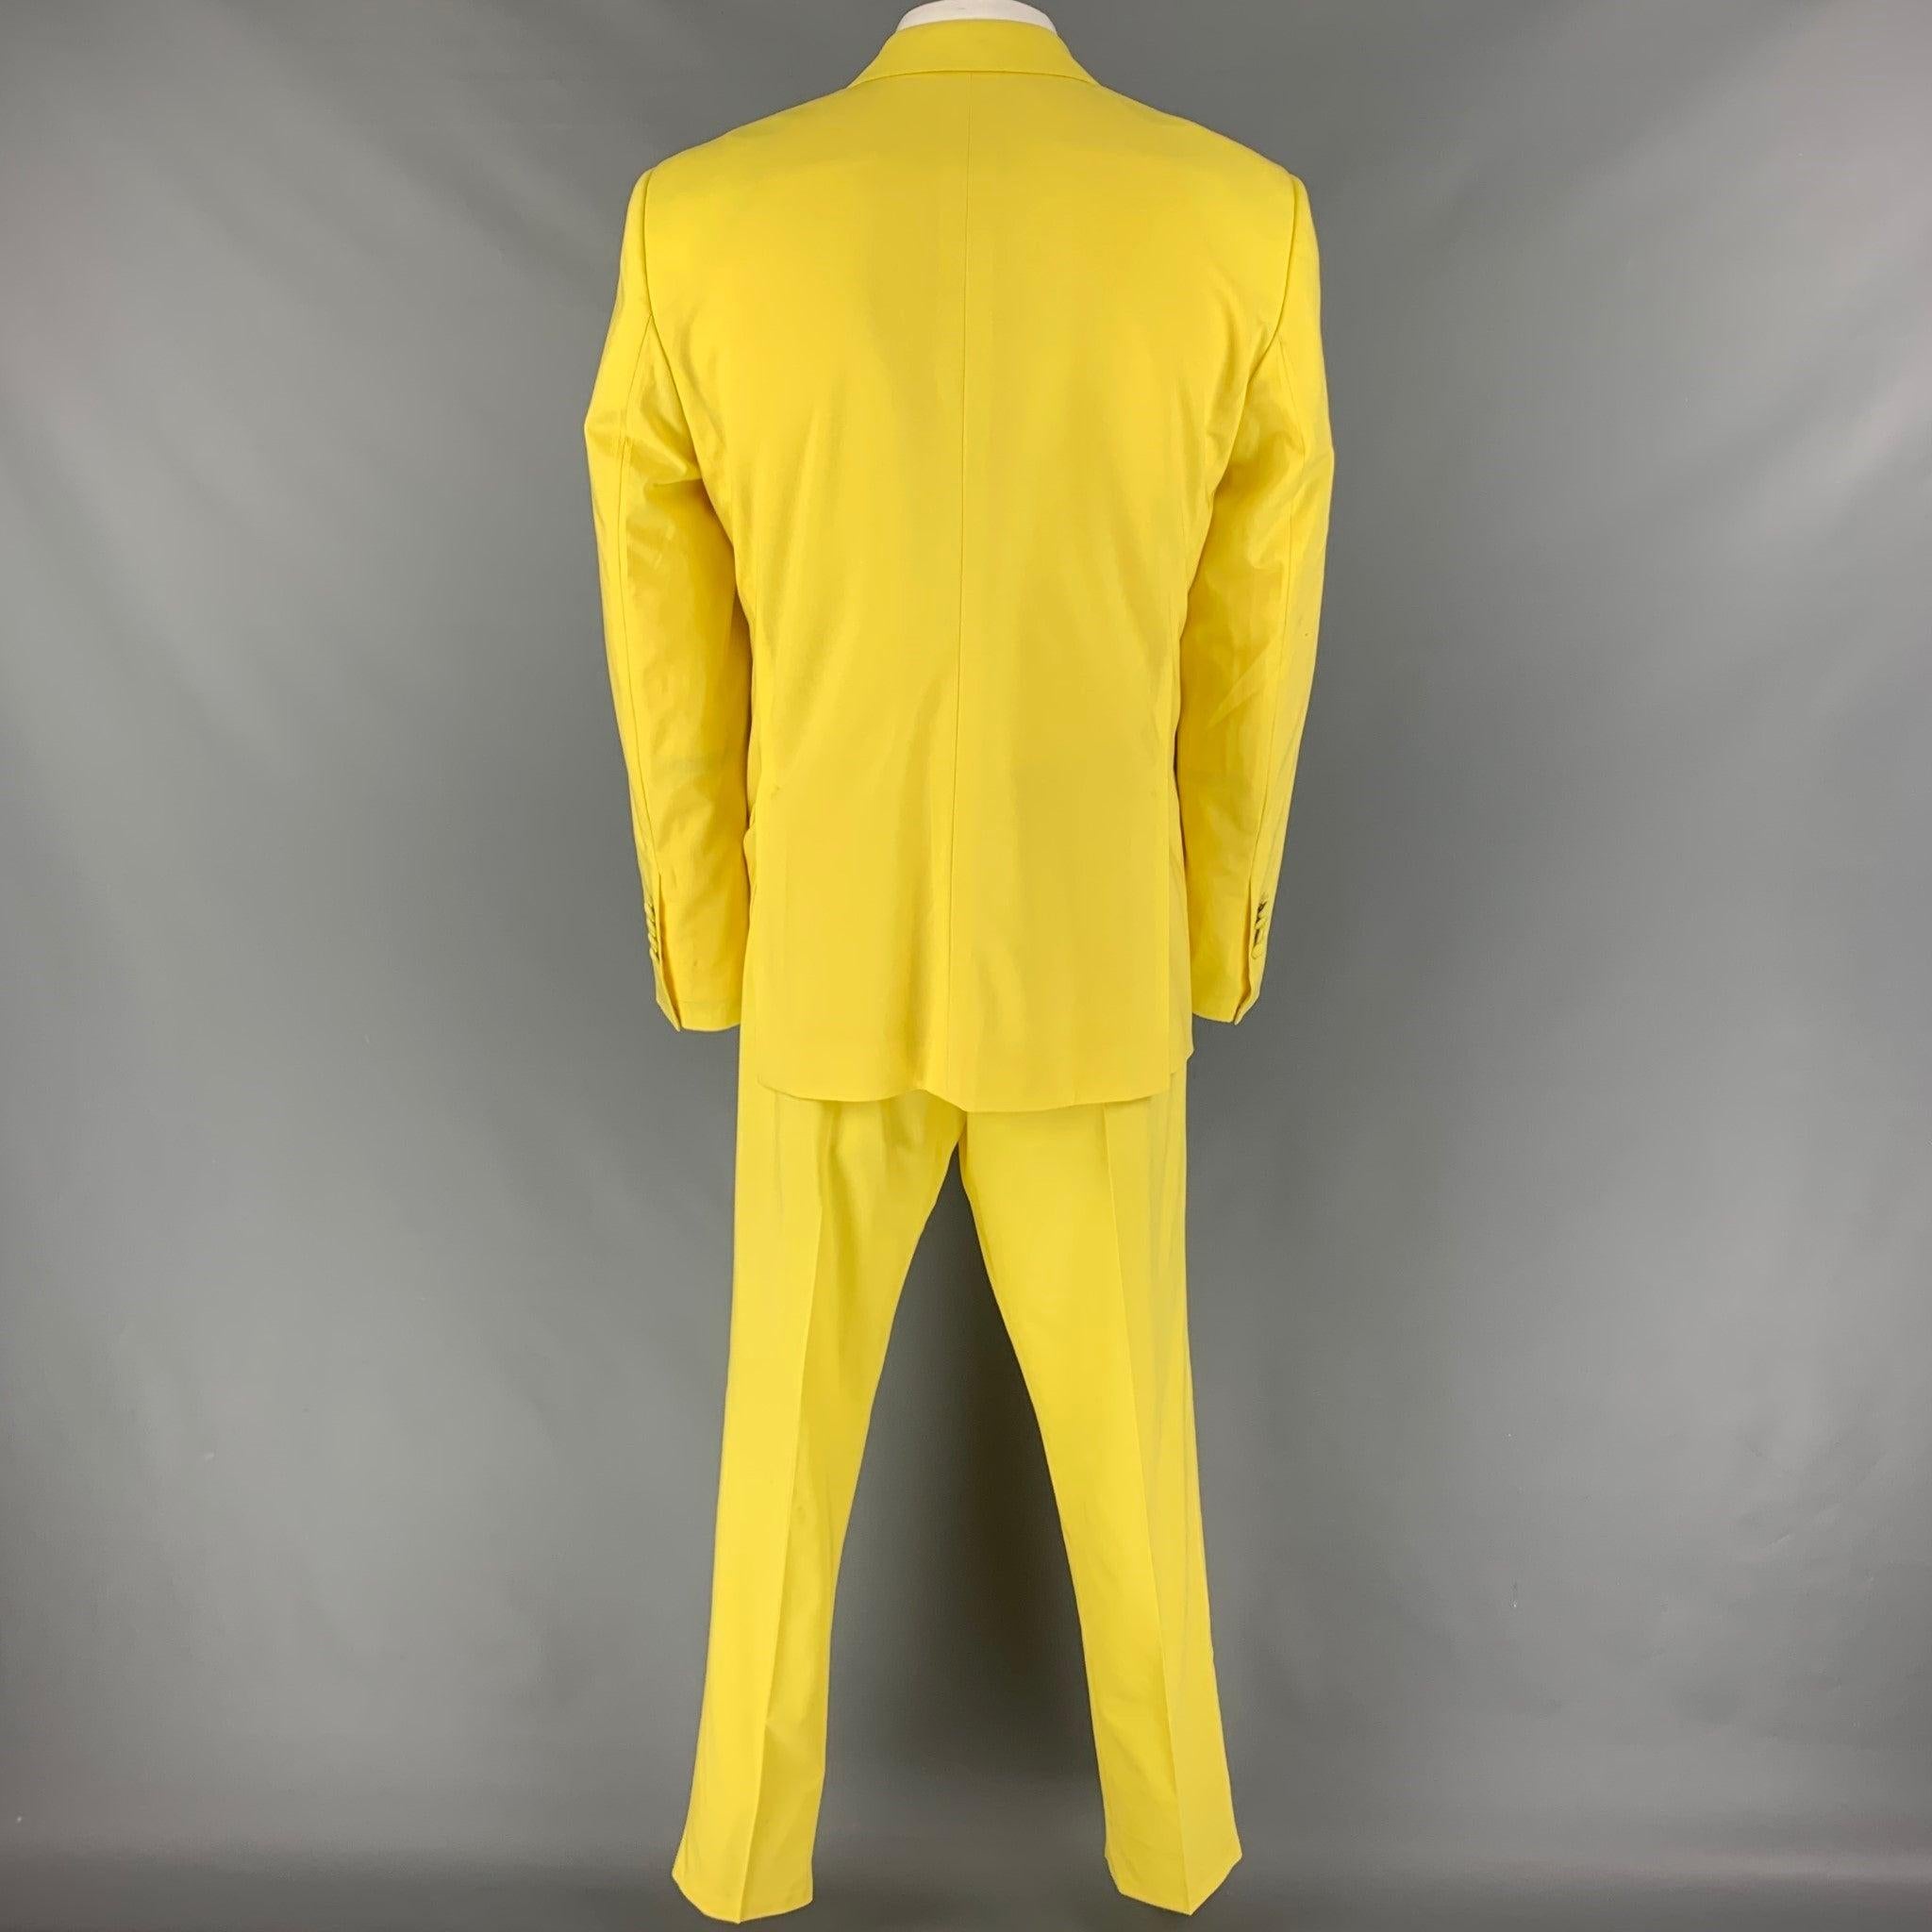 DOLCE & GABBANA Size 48 Yellow Wool Peak Lapel Suit In Good Condition For Sale In San Francisco, CA